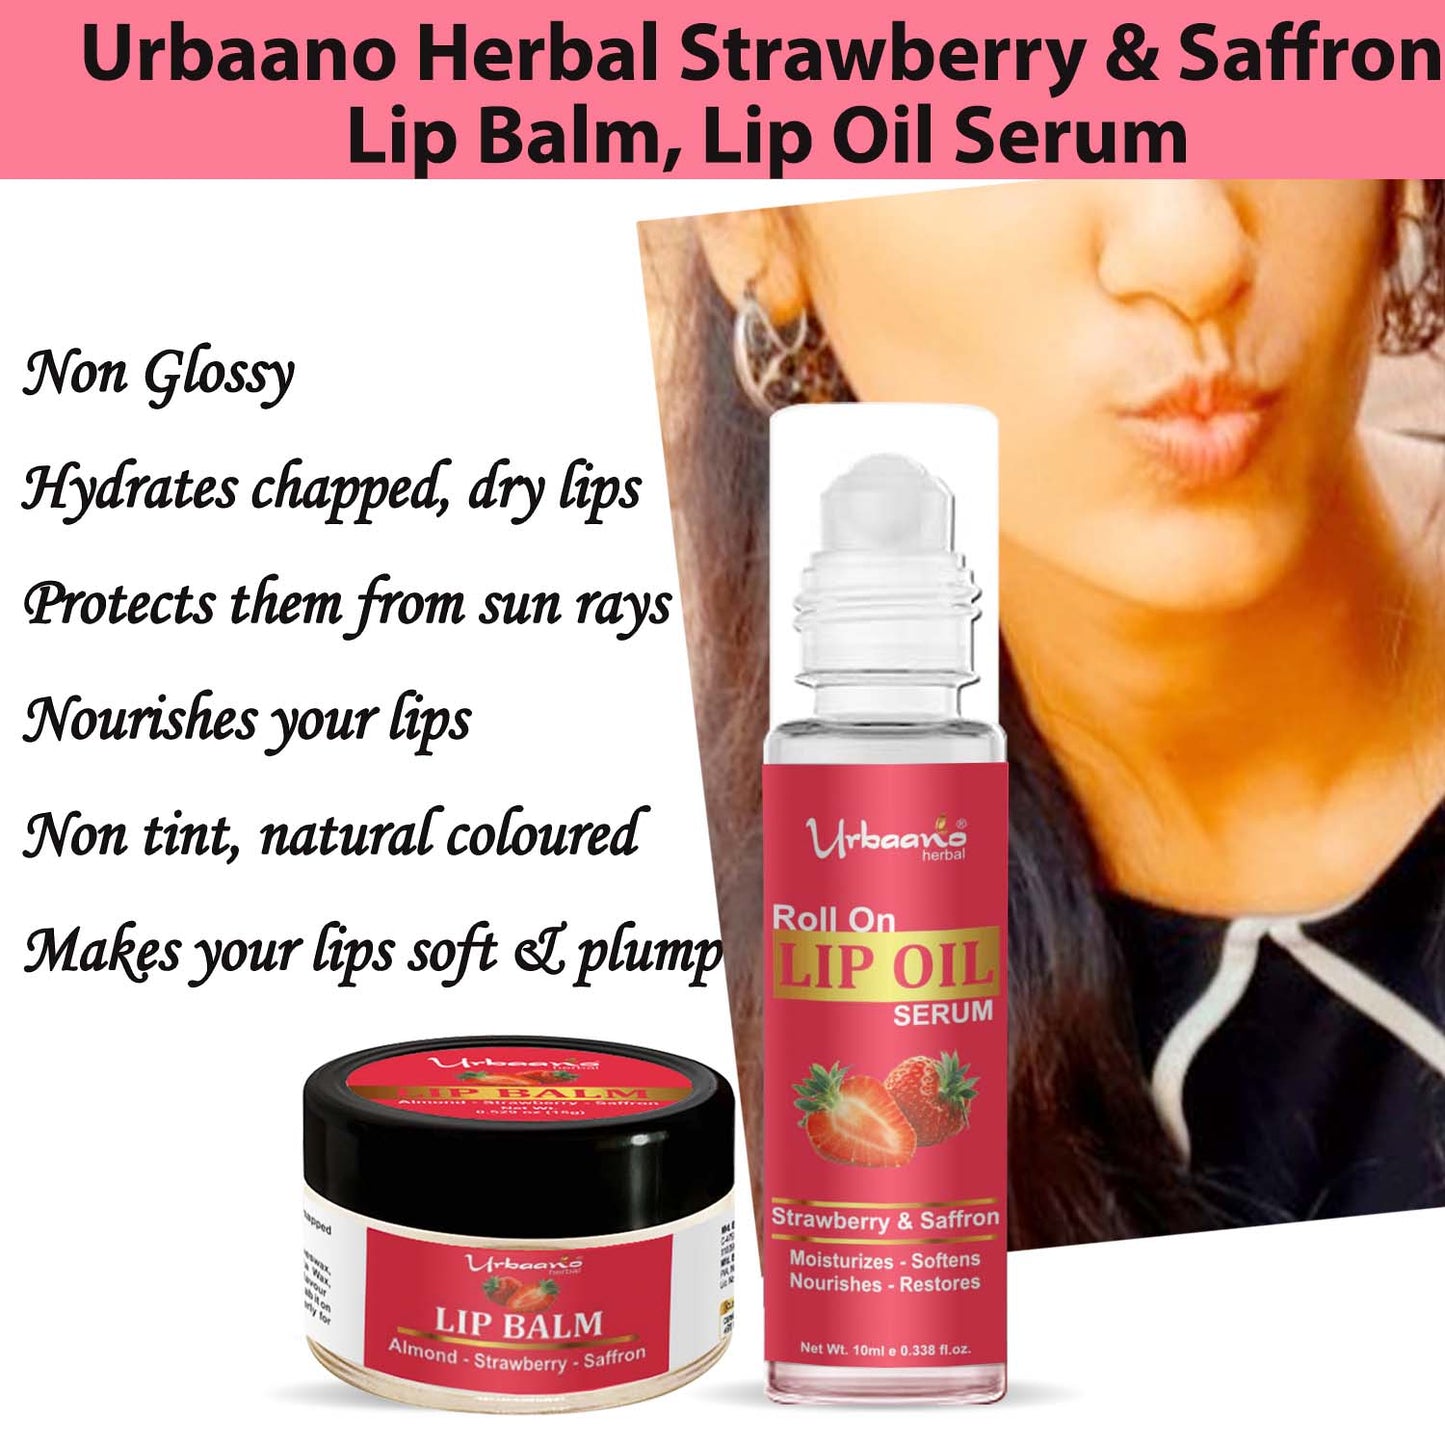 Lip Oil Serum & Liip Balm Combo |Tint free Strawberry Hydrates, Softens, Restores Natural Colour